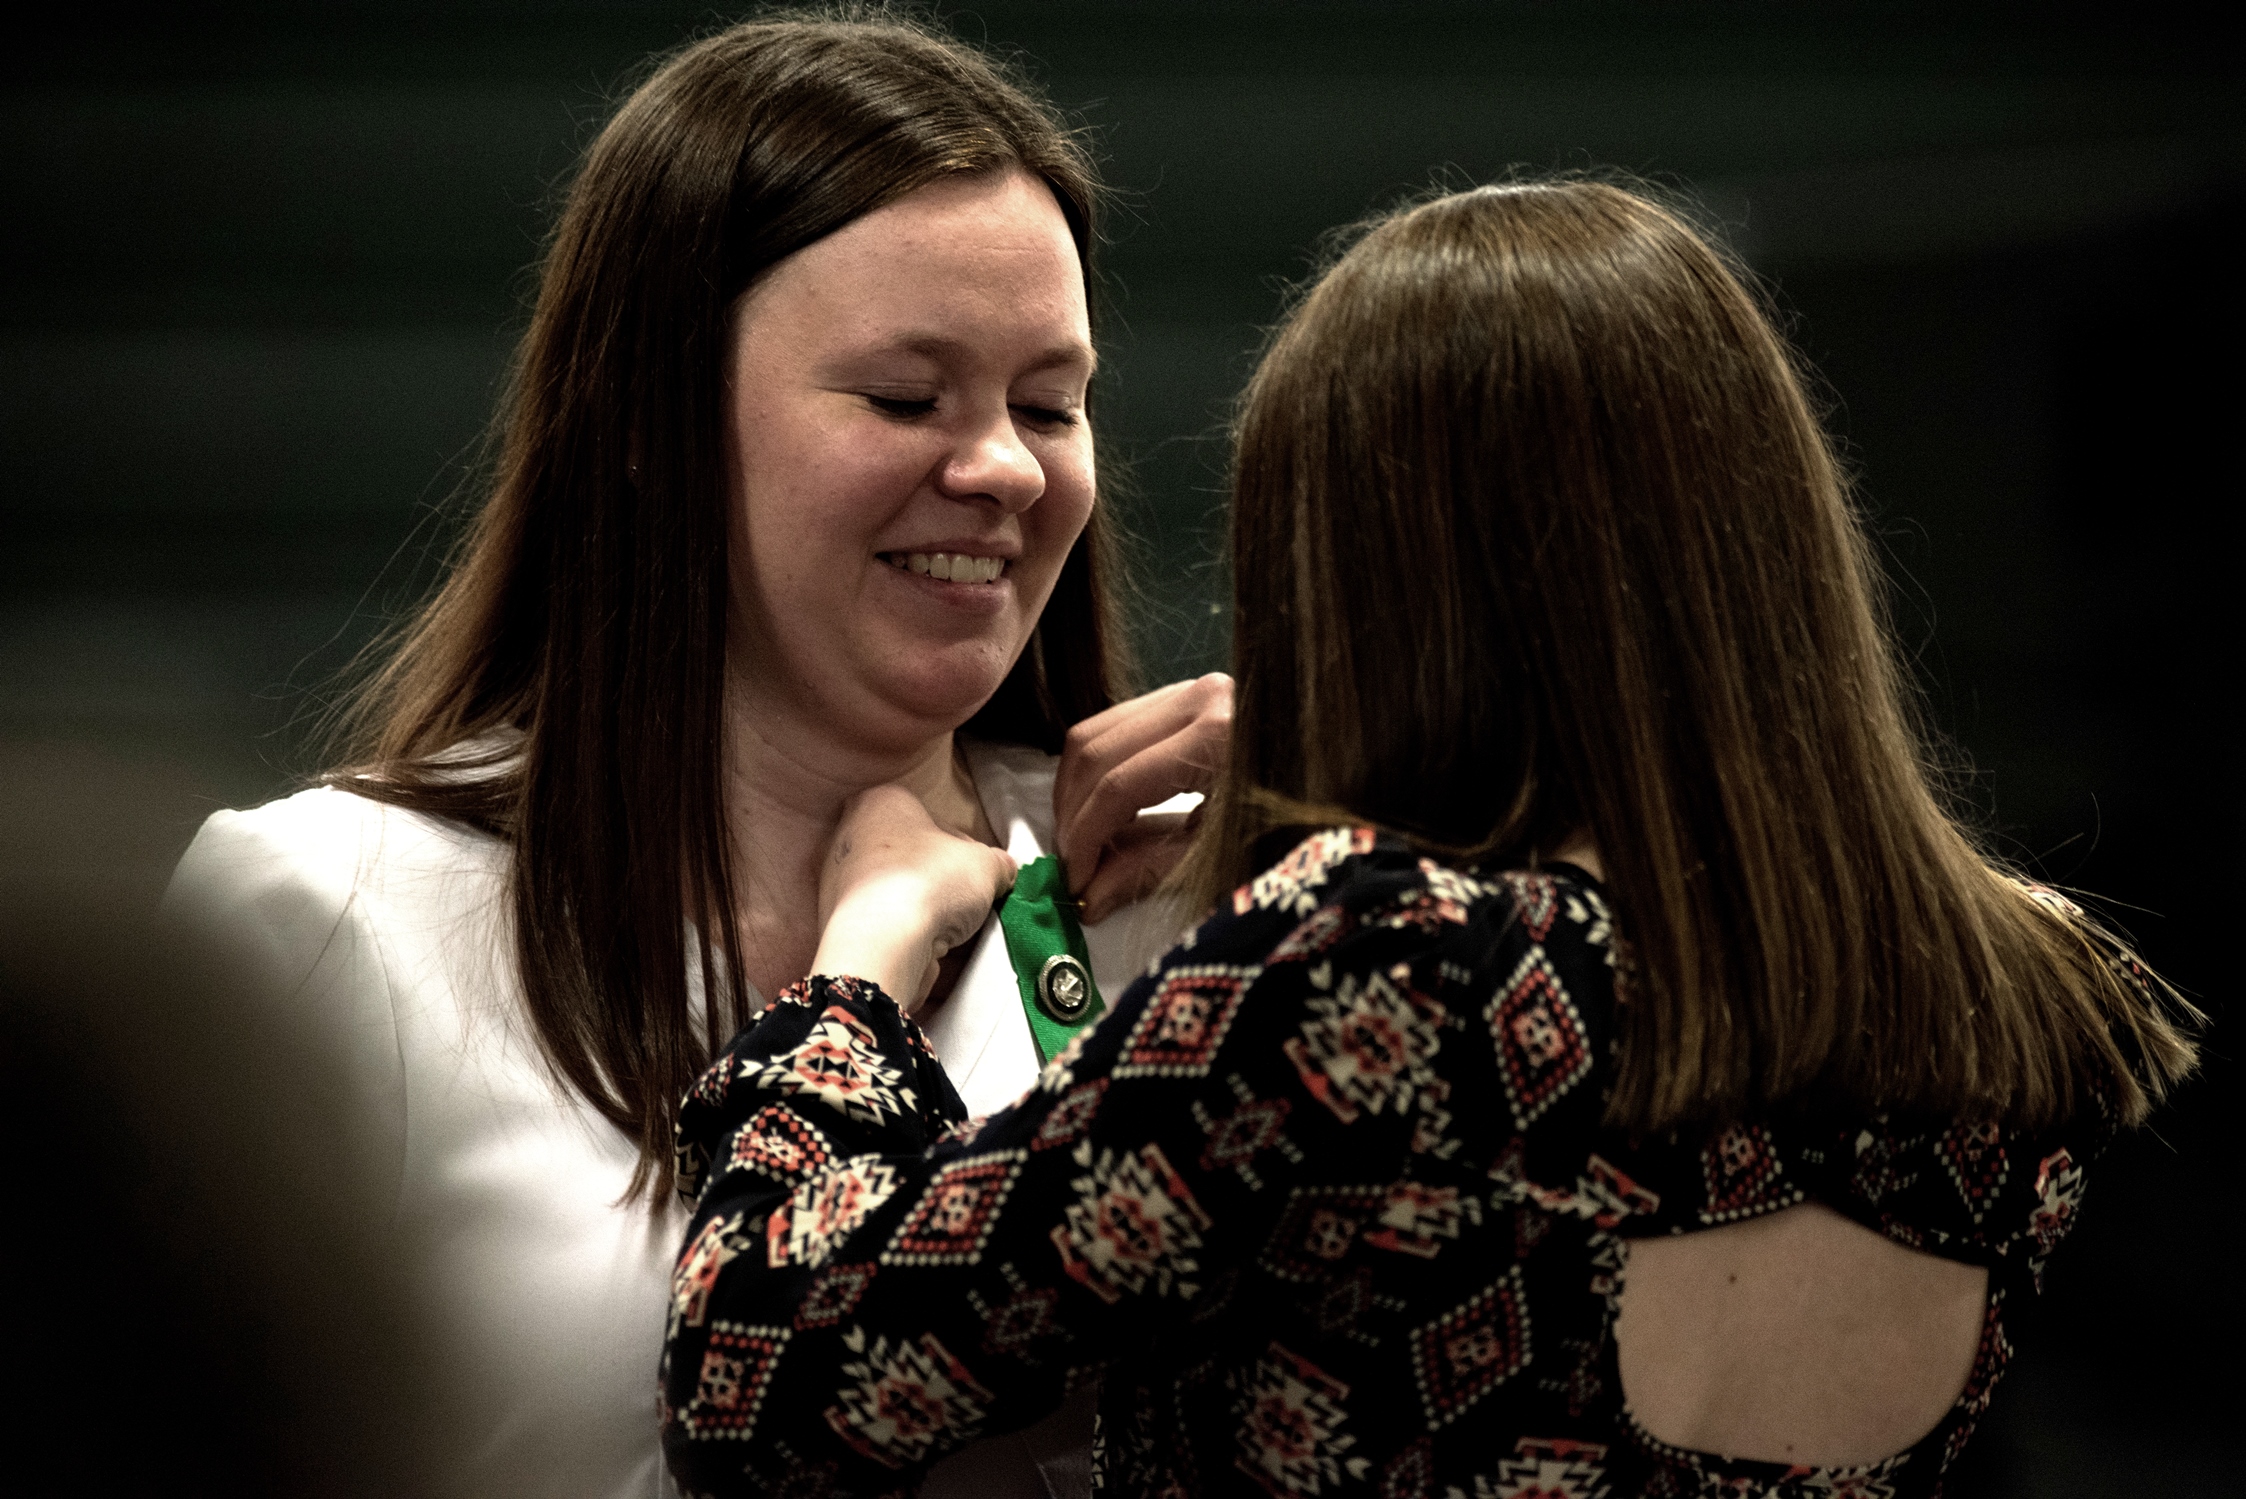 Nurse receiving a pin during the pinning ceremony